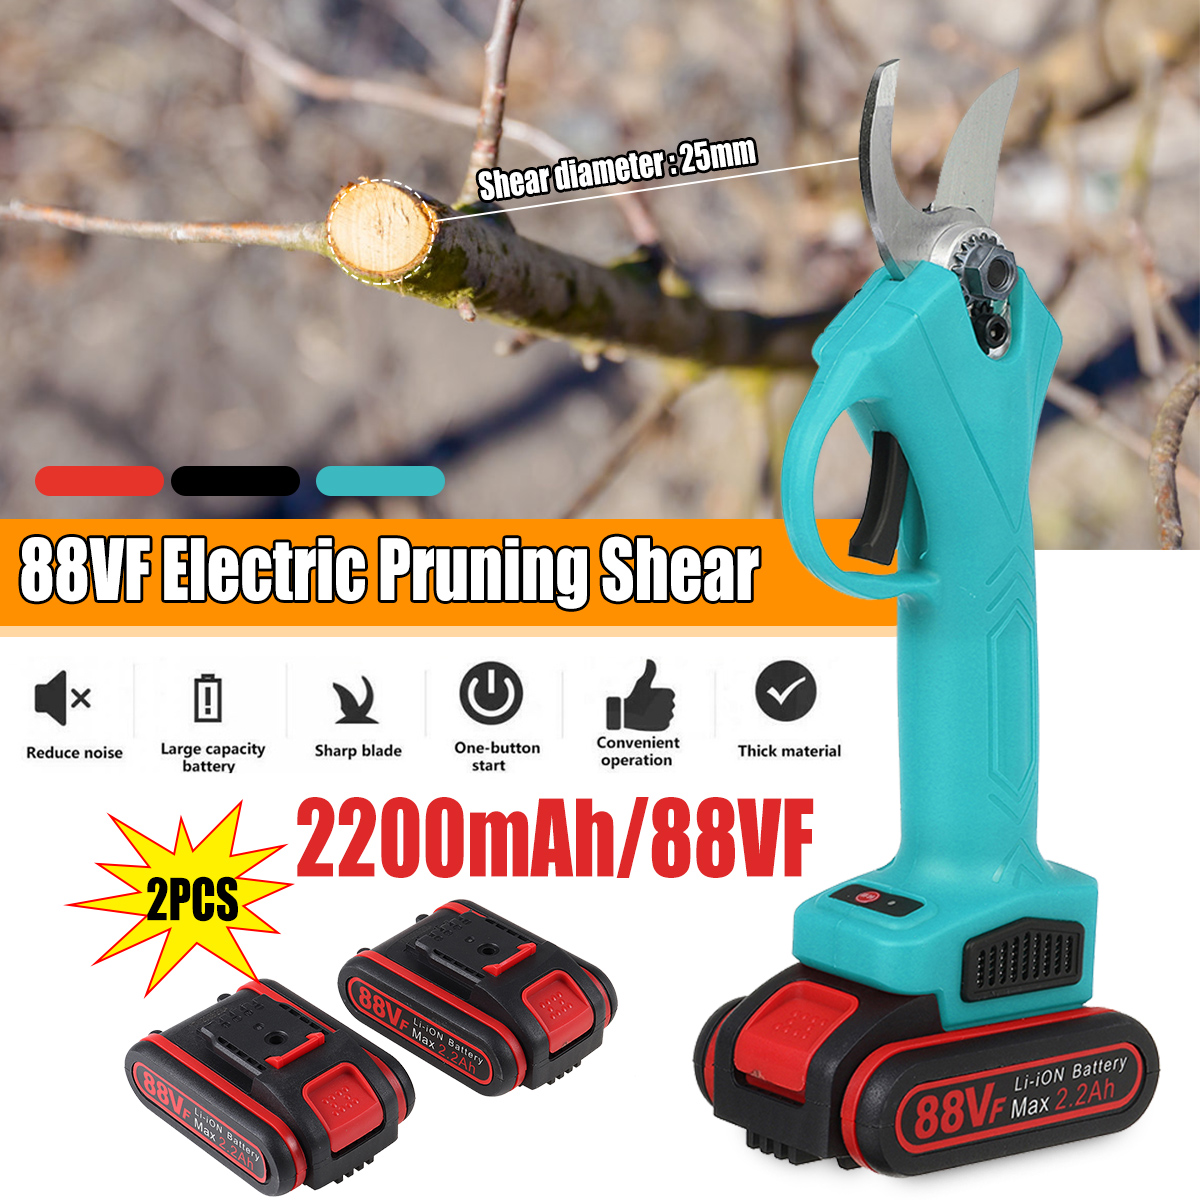 88VF-Wireless-25mm-Rechargeable-Electric-Scissors-Branch-Pruning-Shear-Tree-Cutting-Tools-W-2-Batter-1749244-1